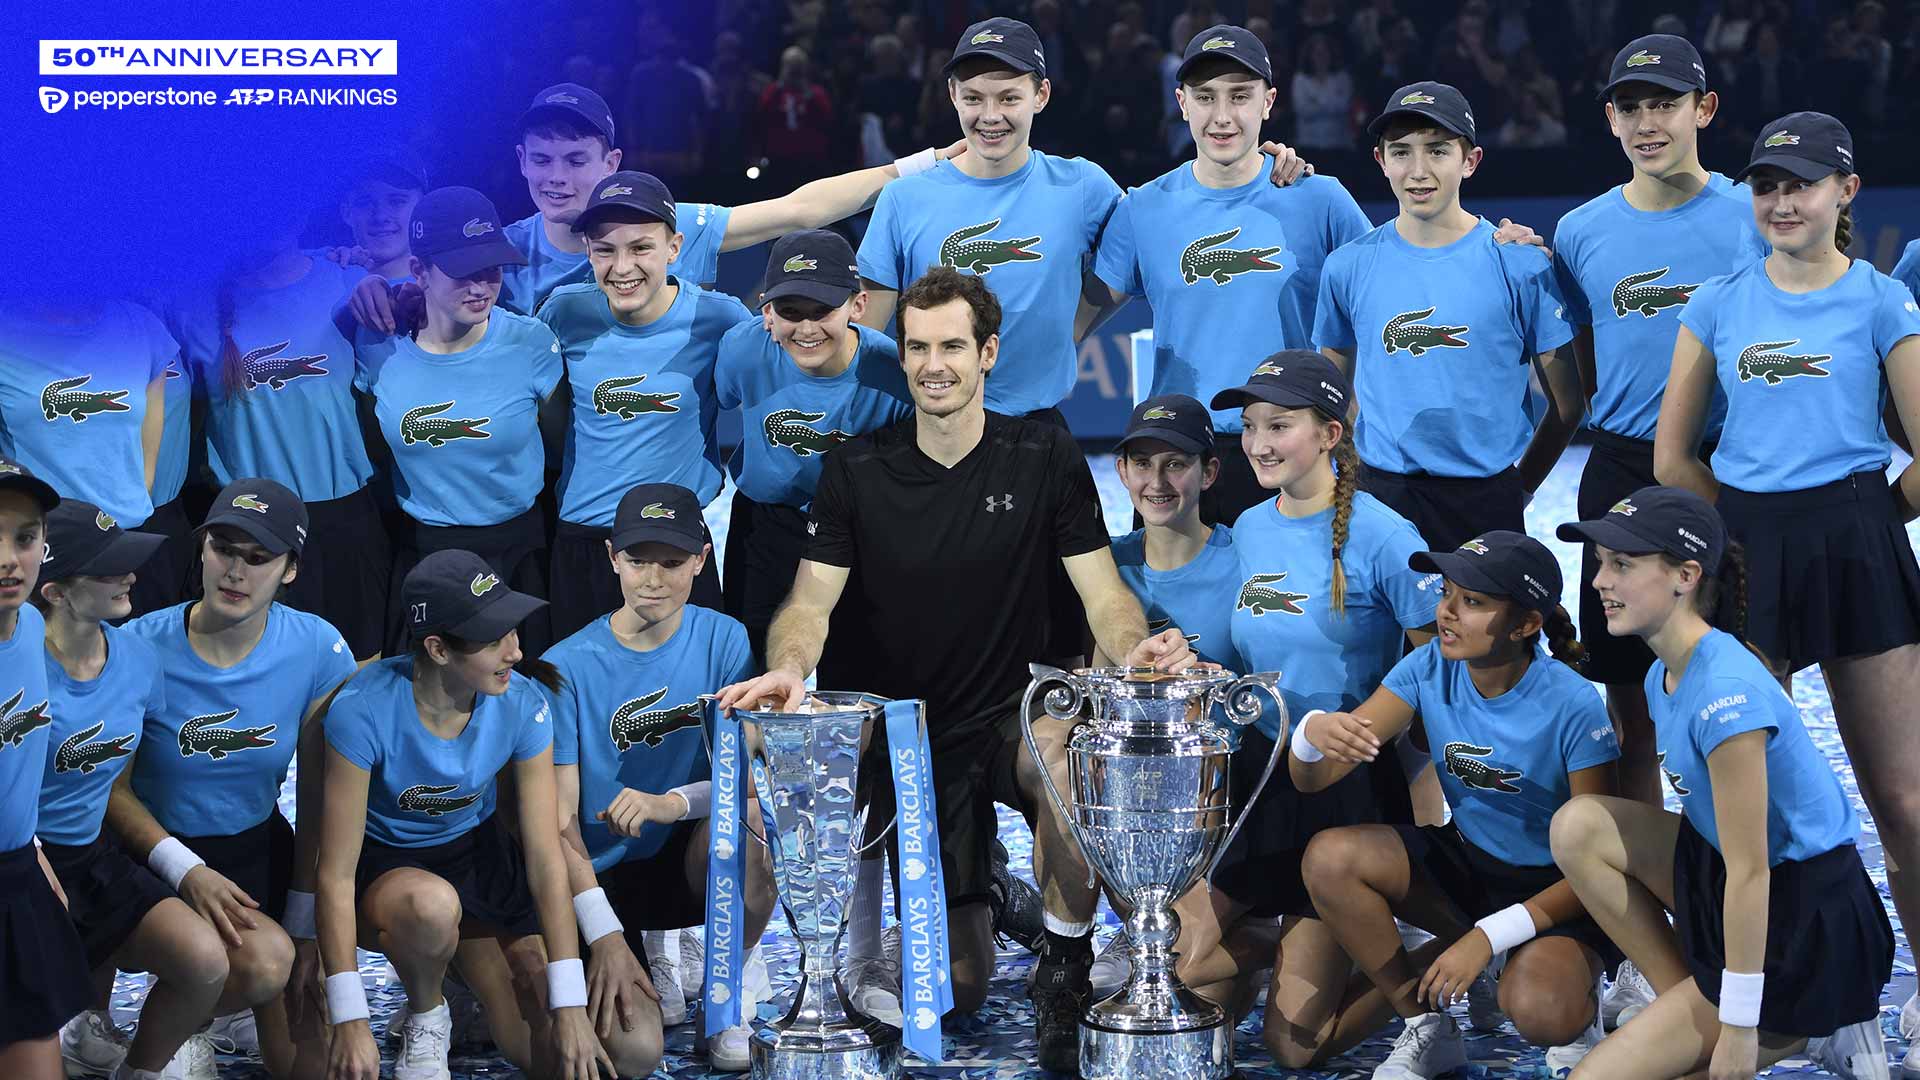 The Rankings That Changed Tennis, ATP Tour